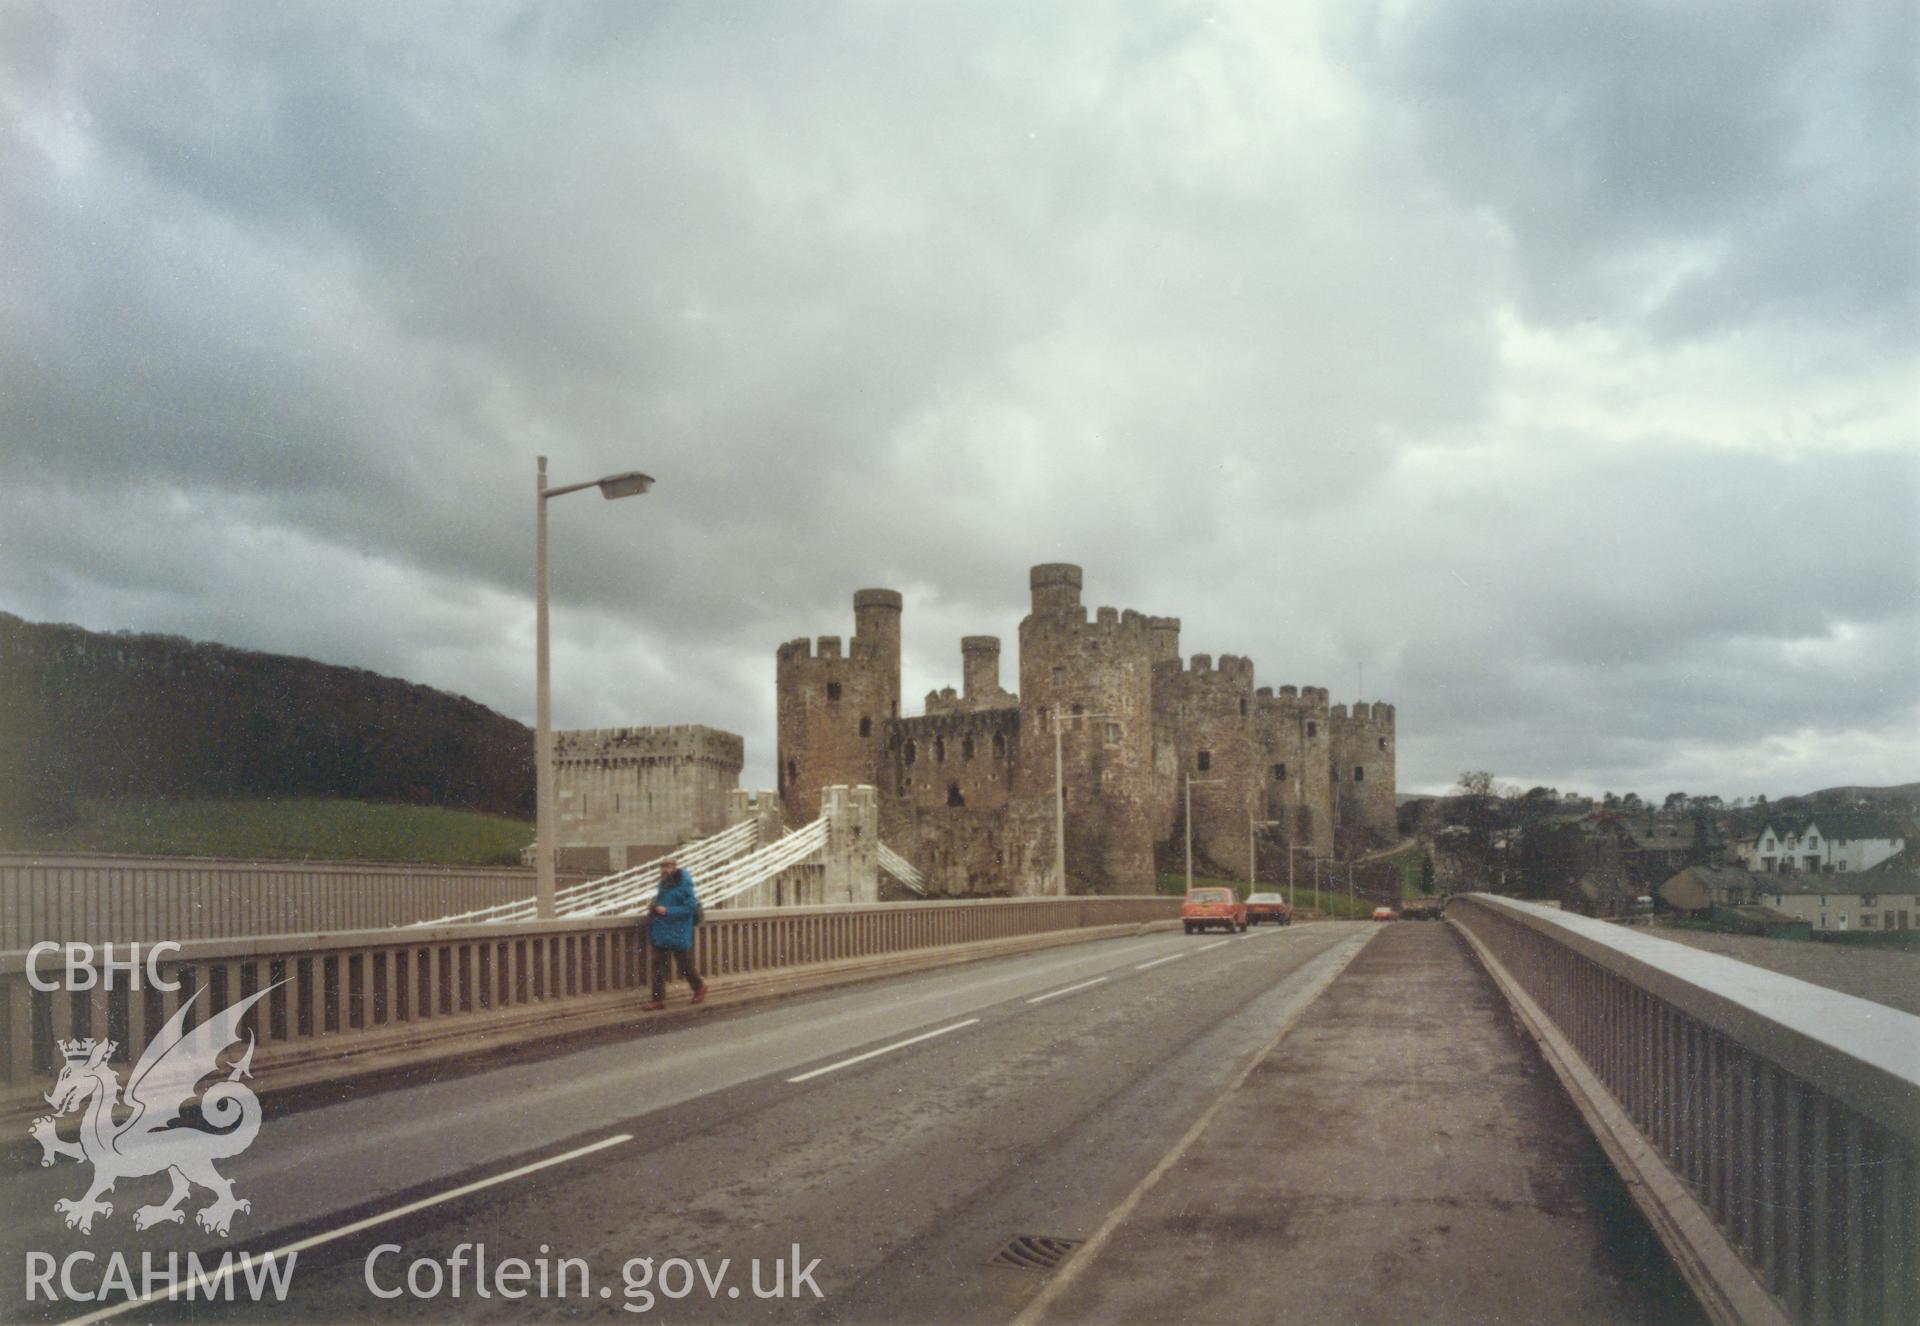 1 of a set of 27 colour prints: print showing view of Conwy castle and bridges, collated by the former Central Office of Information.